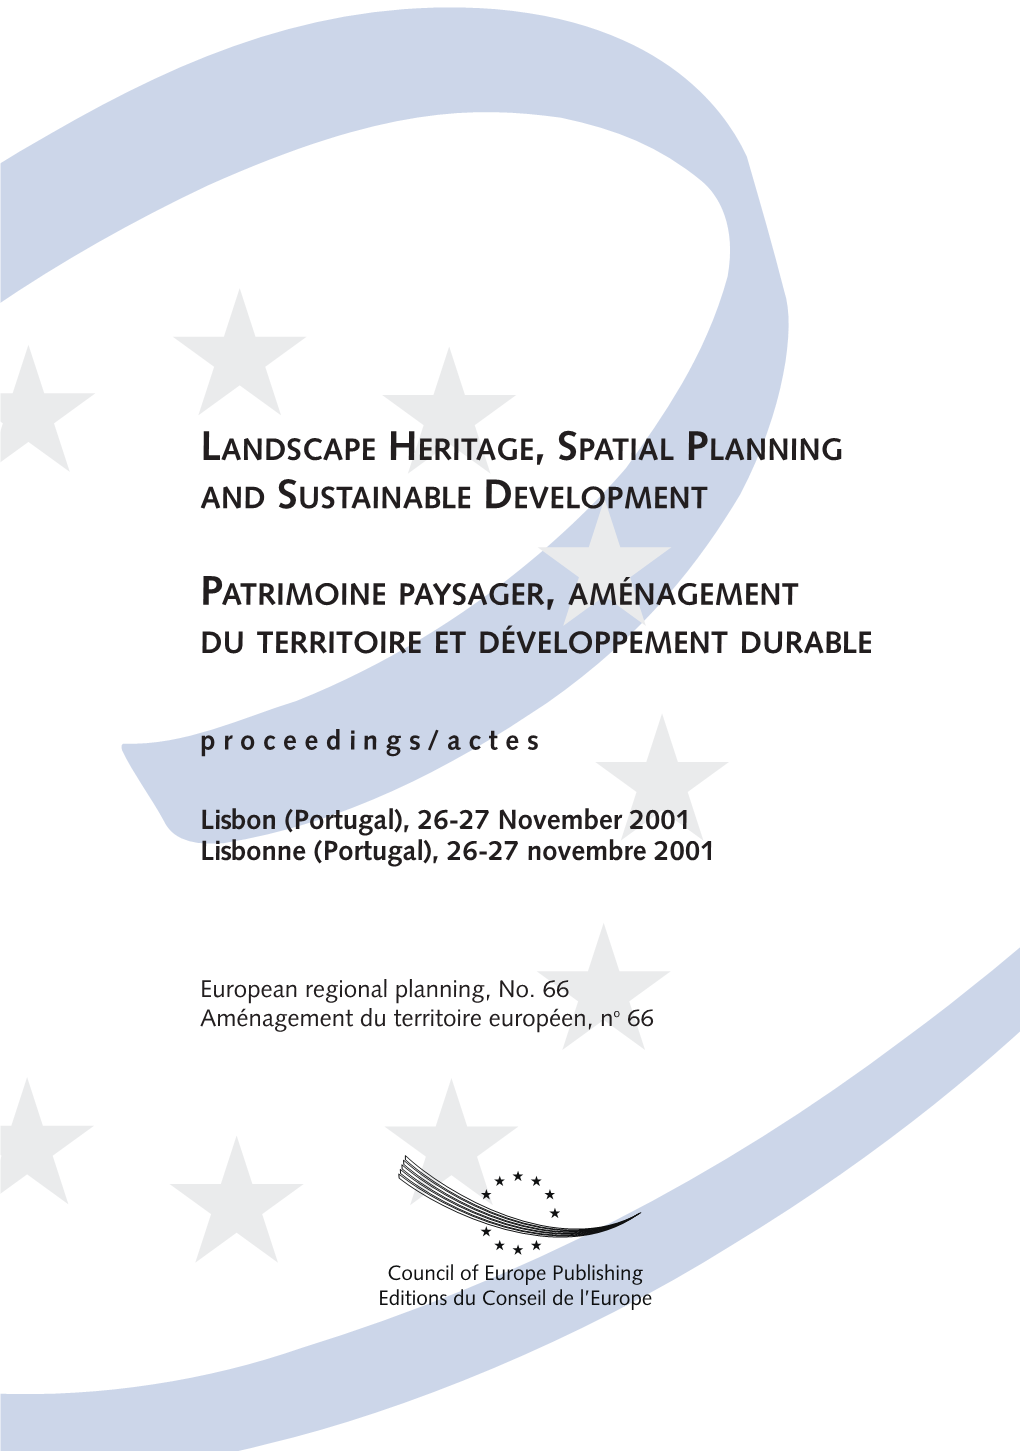 Landscape Heritage, Spatial Planning and Sustainable Development